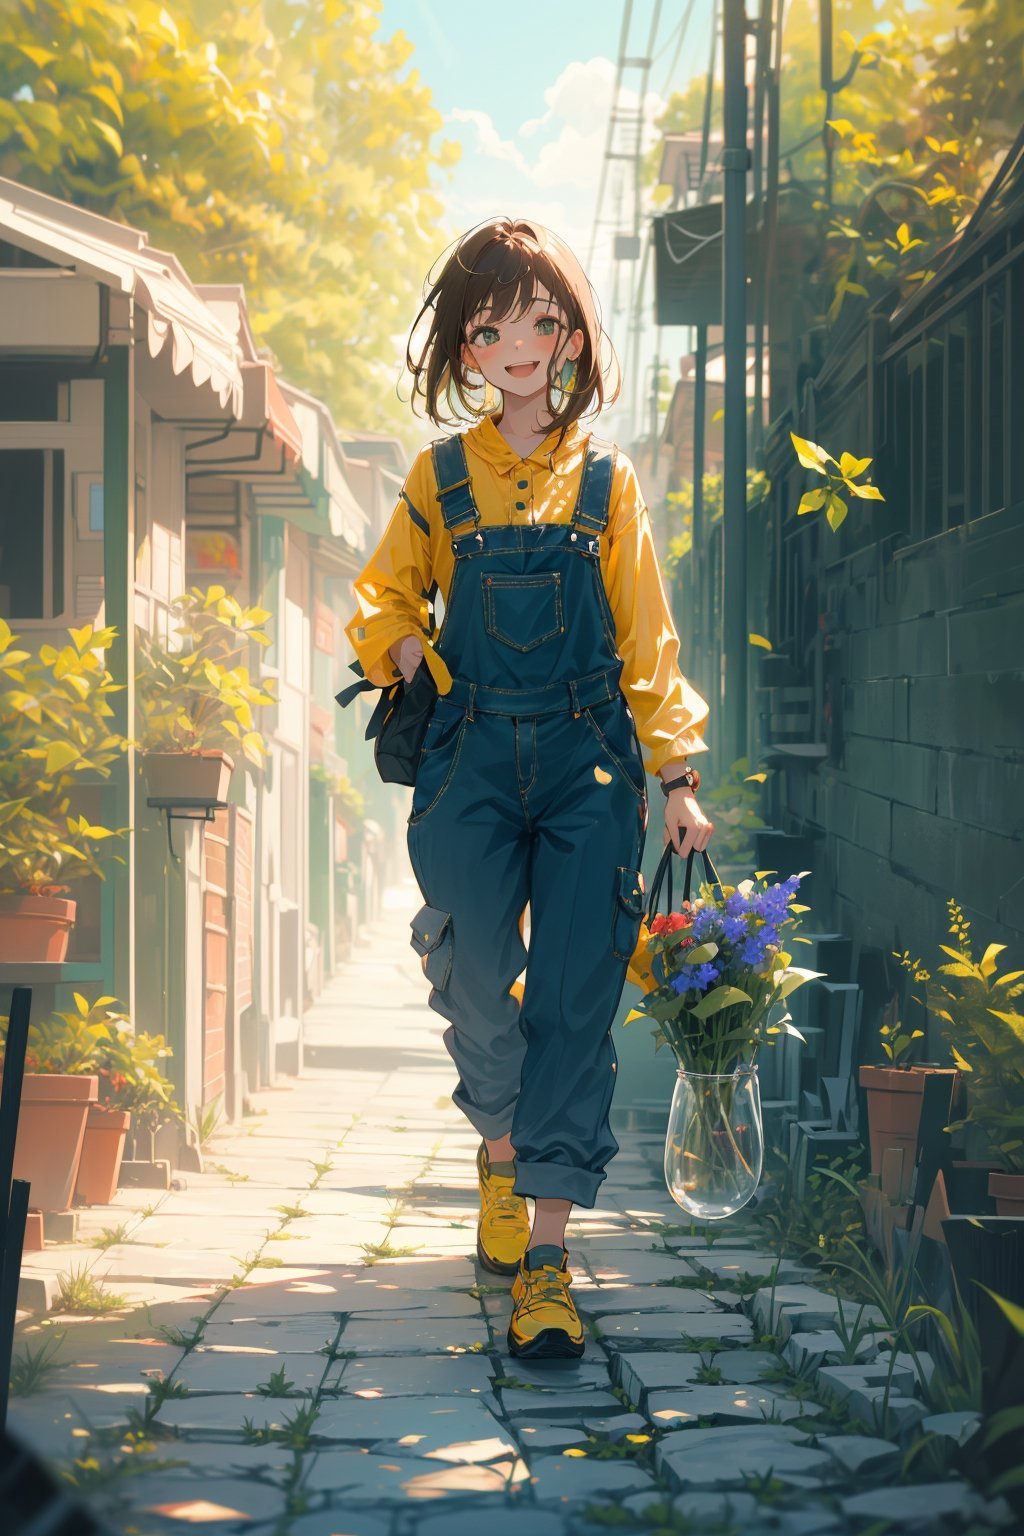 A girl wearing cute overalls, walking theough bright outdoors, greenery surrounds the path, small flowers with vibrant colours, cobblestone path, sunny day, lush green trees, joyous face on girl, young girl, relaxing stroll, brown hair